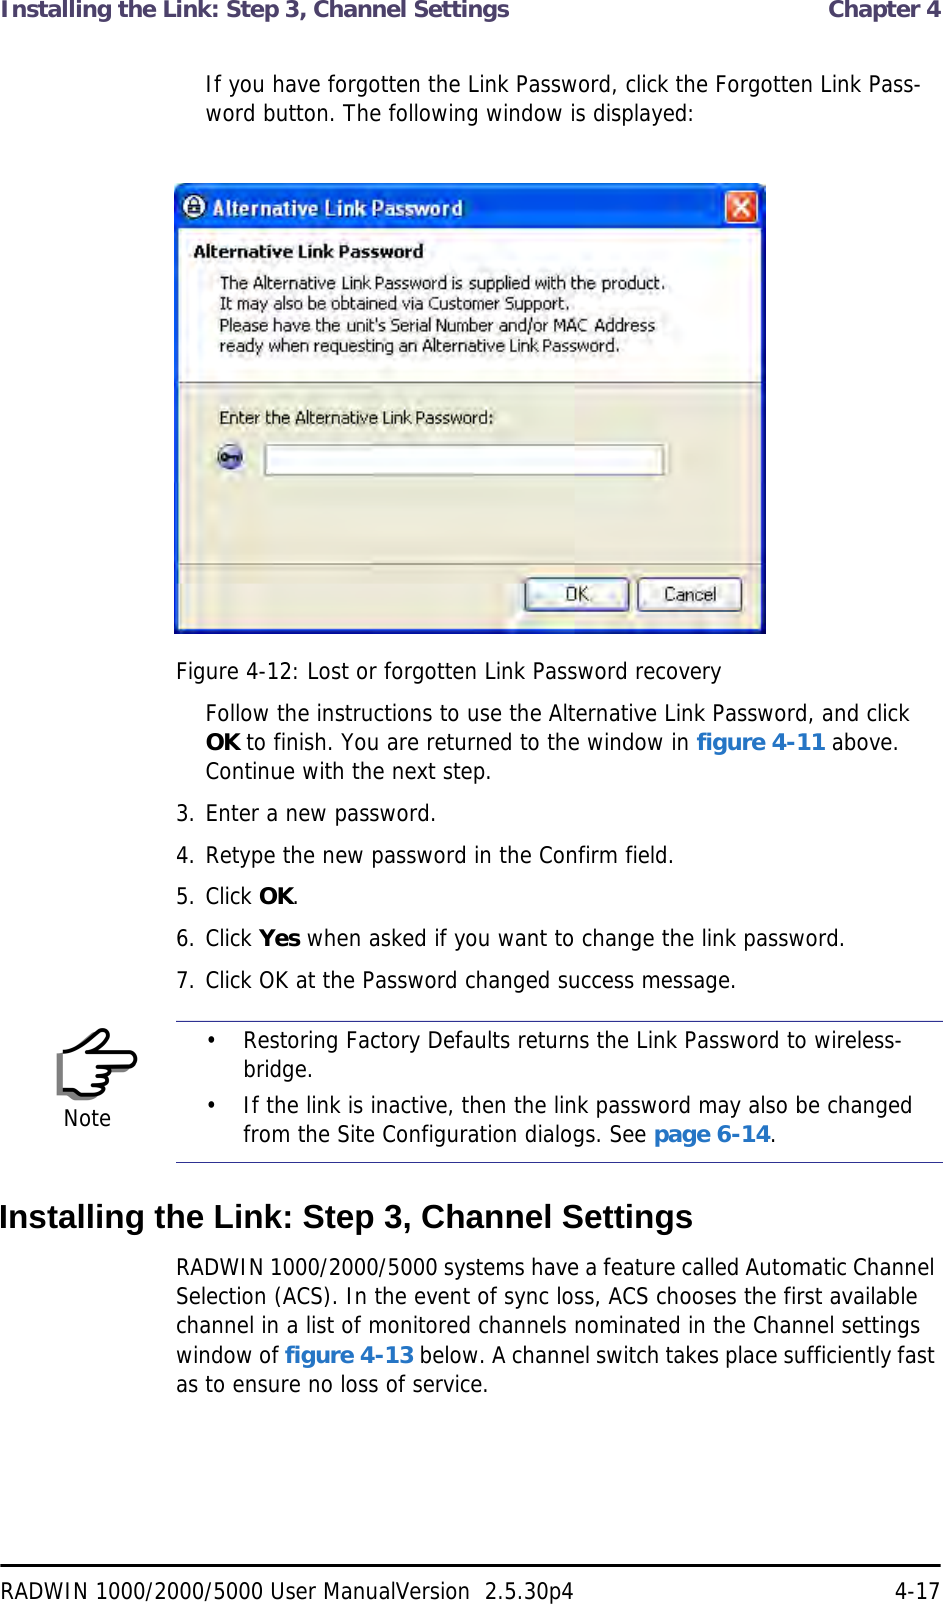 Installing the Link: Step 3, Channel Settings  Chapter 4RADWIN 1000/2000/5000 User ManualVersion  2.5.30p4 4-17If you have forgotten the Link Password, click the Forgotten Link Pass-word button. The following window is displayed:Figure 4-12: Lost or forgotten Link Password recoveryFollow the instructions to use the Alternative Link Password, and click OK to finish. You are returned to the window in figure 4-11 above. Continue with the next step.3. Enter a new password.4. Retype the new password in the Confirm field.5. Click OK.6. Click Yes when asked if you want to change the link password.7. Click OK at the Password changed success message.Installing the Link: Step 3, Channel SettingsRADWIN 1000/2000/5000 systems have a feature called Automatic Channel Selection (ACS). In the event of sync loss, ACS chooses the first available channel in a list of monitored channels nominated in the Channel settings window of figure 4-13 below. A channel switch takes place sufficiently fast as to ensure no loss of service.Note• Restoring Factory Defaults returns the Link Password to wireless-bridge.• If the link is inactive, then the link password may also be changed from the Site Configuration dialogs. See page 6-14.